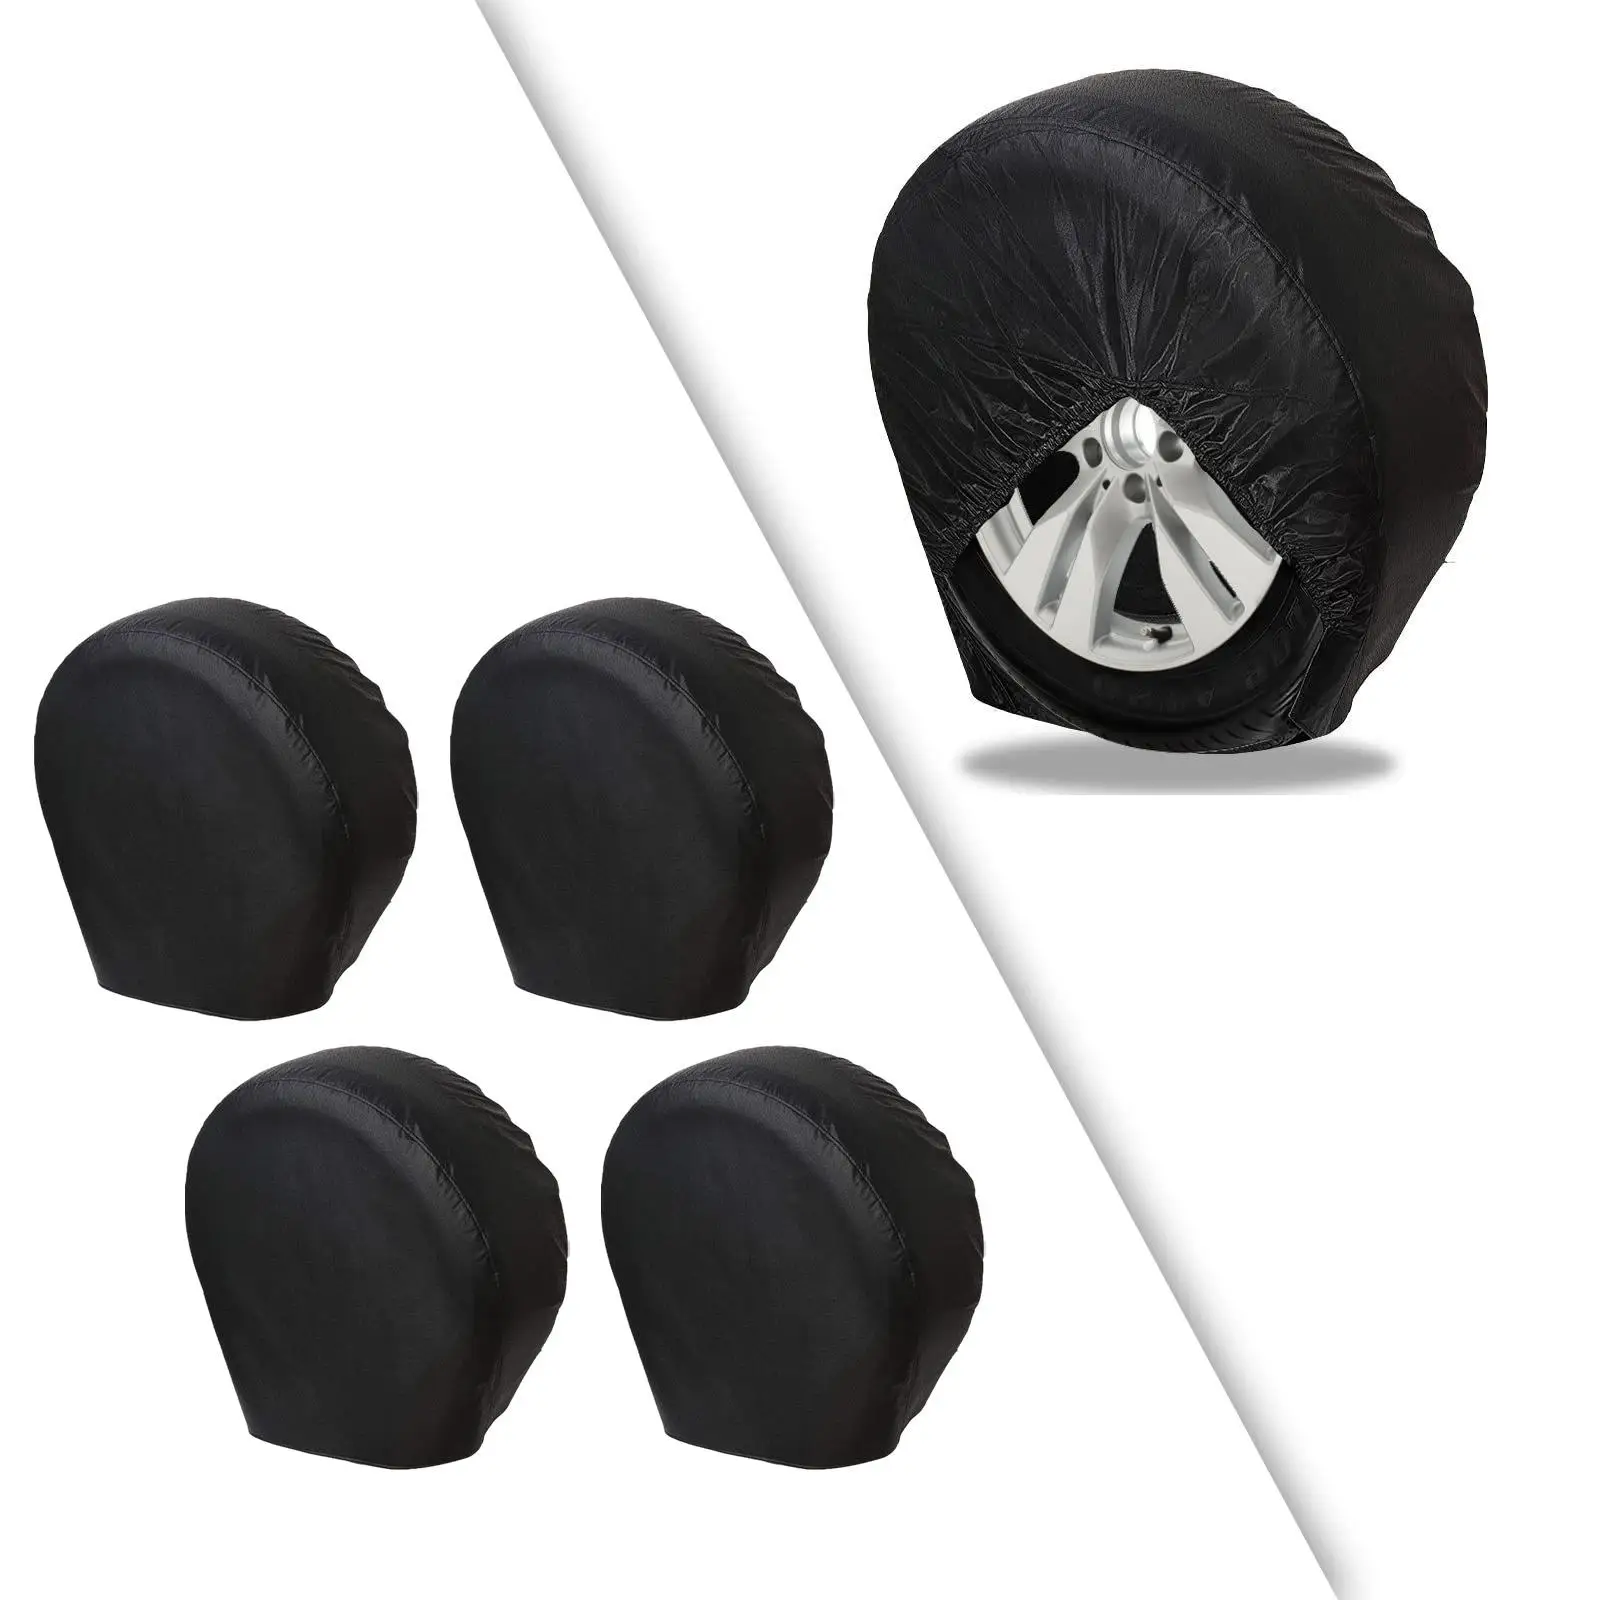 4Pcs Wheel Cover Protective Cover Tire Wheel Protector for Camper Car SUV